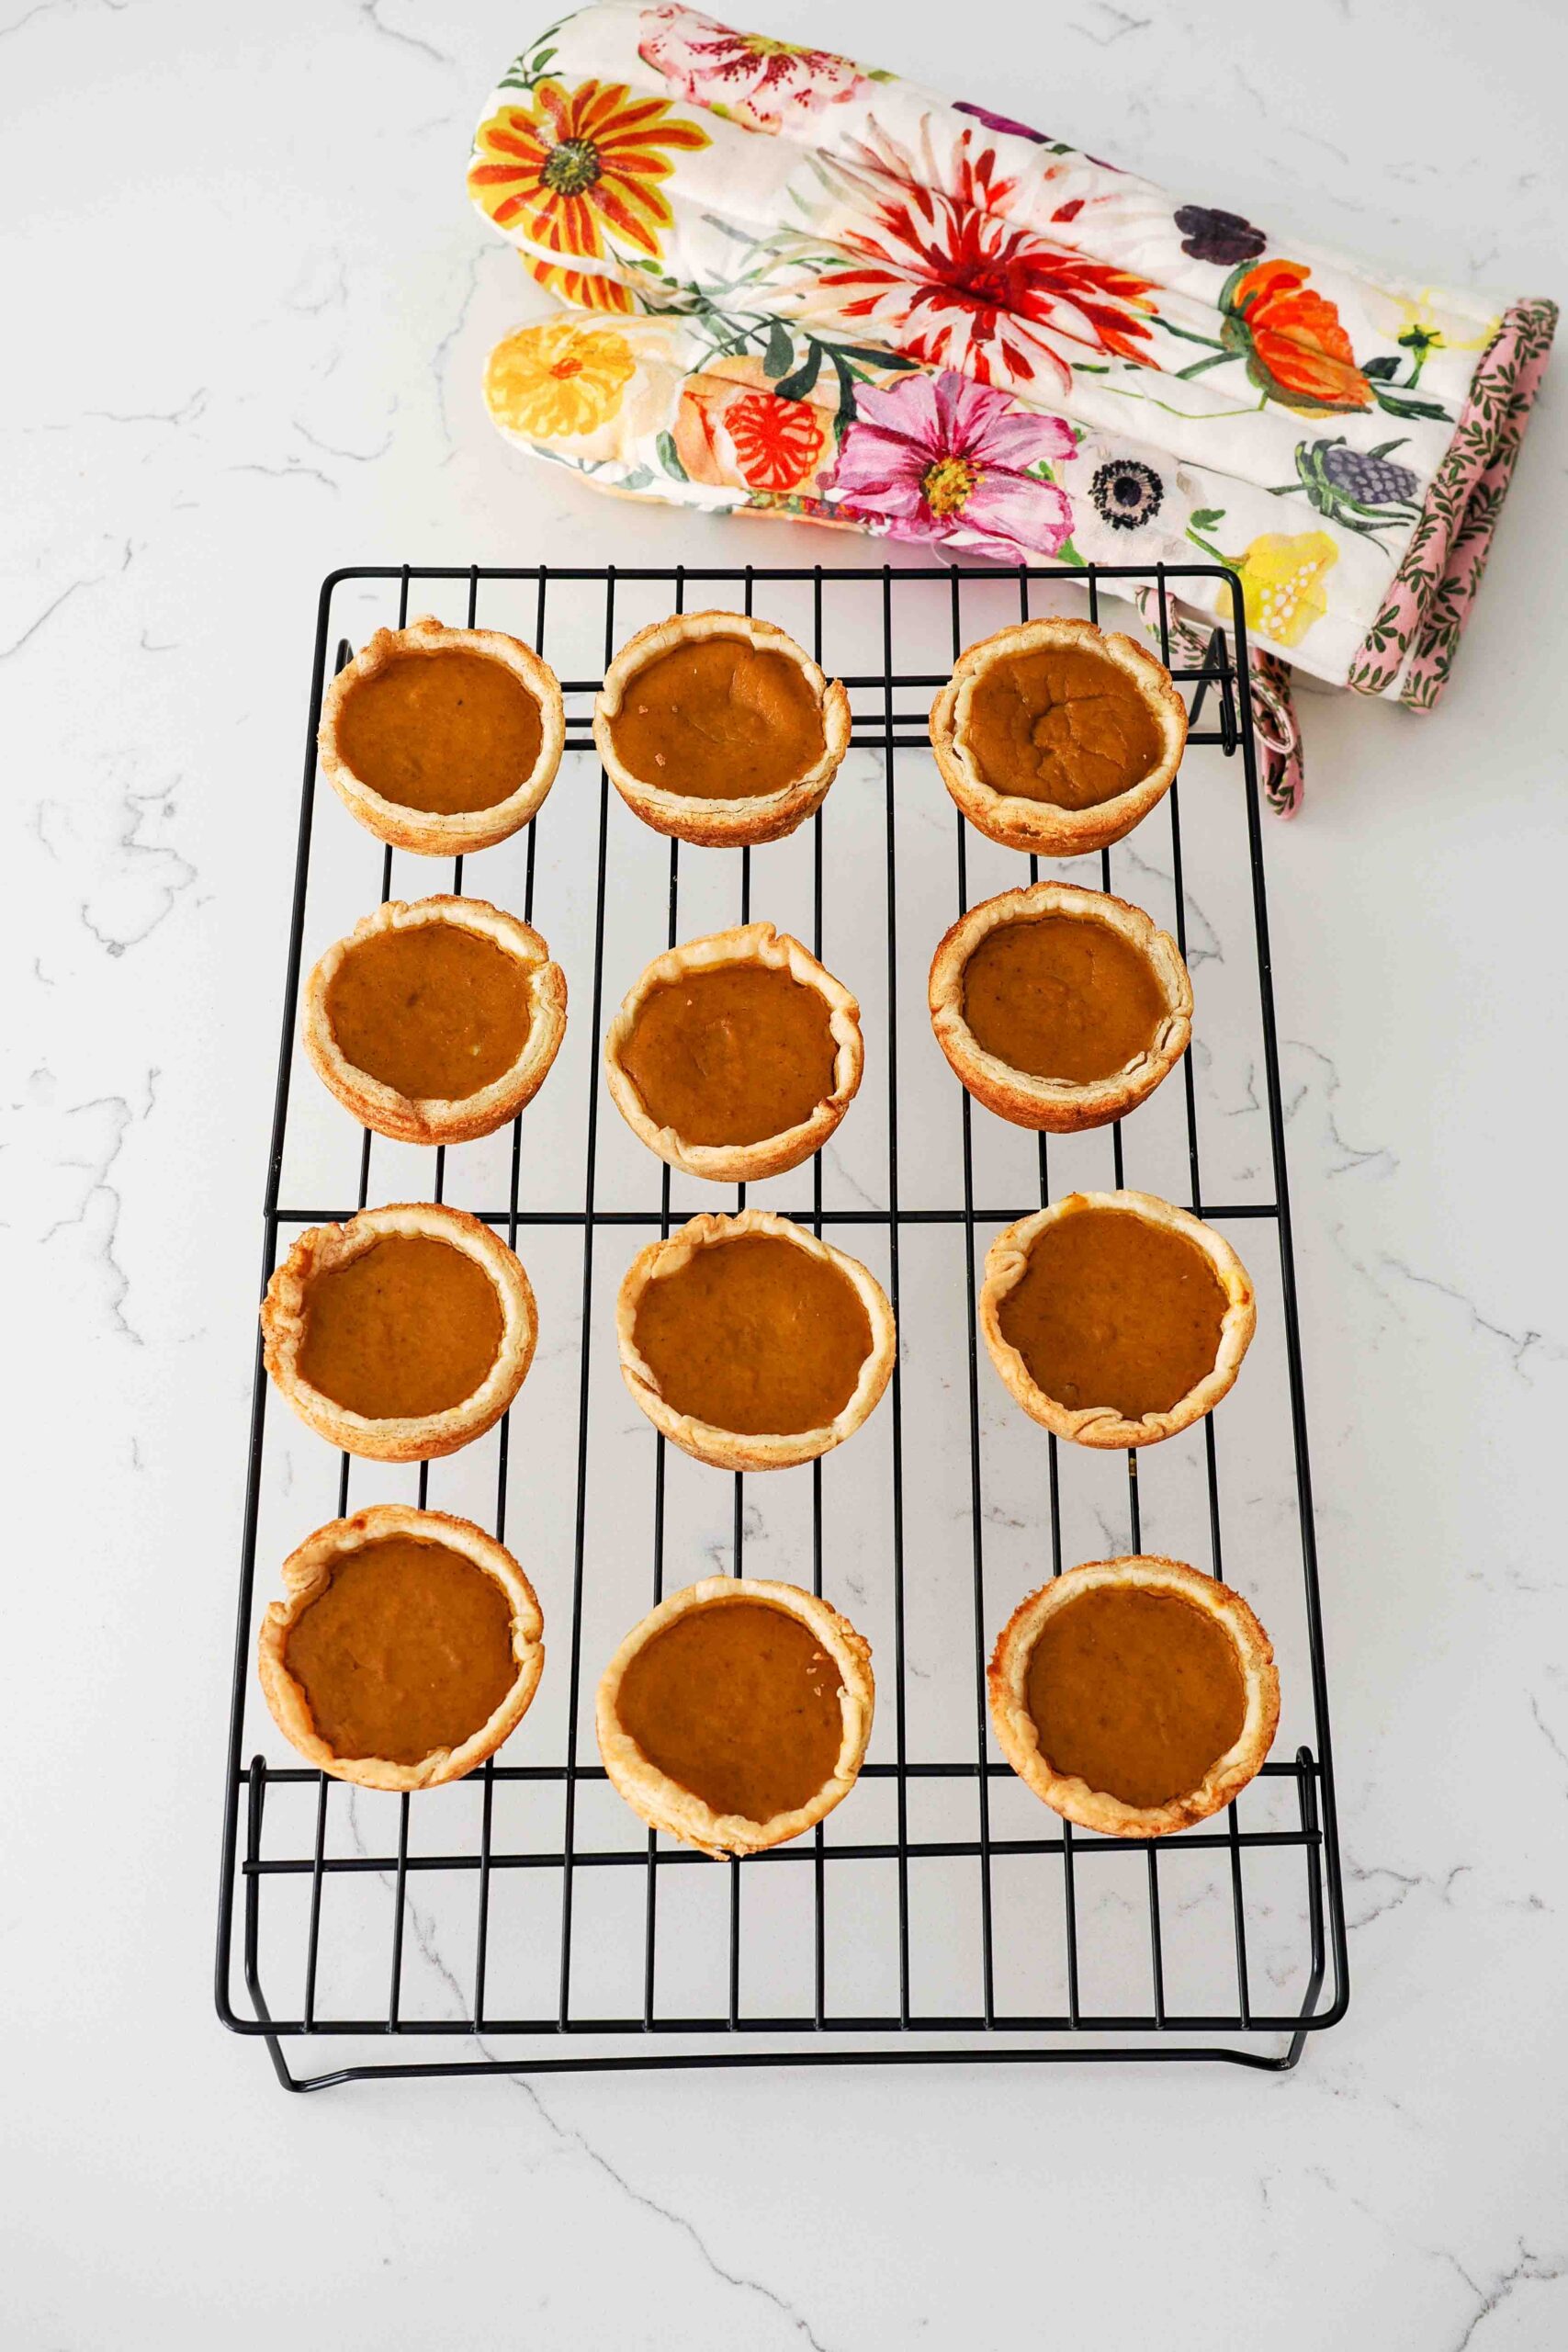 Pumpkin pies made in a muffin pan cooling on a wire rack.